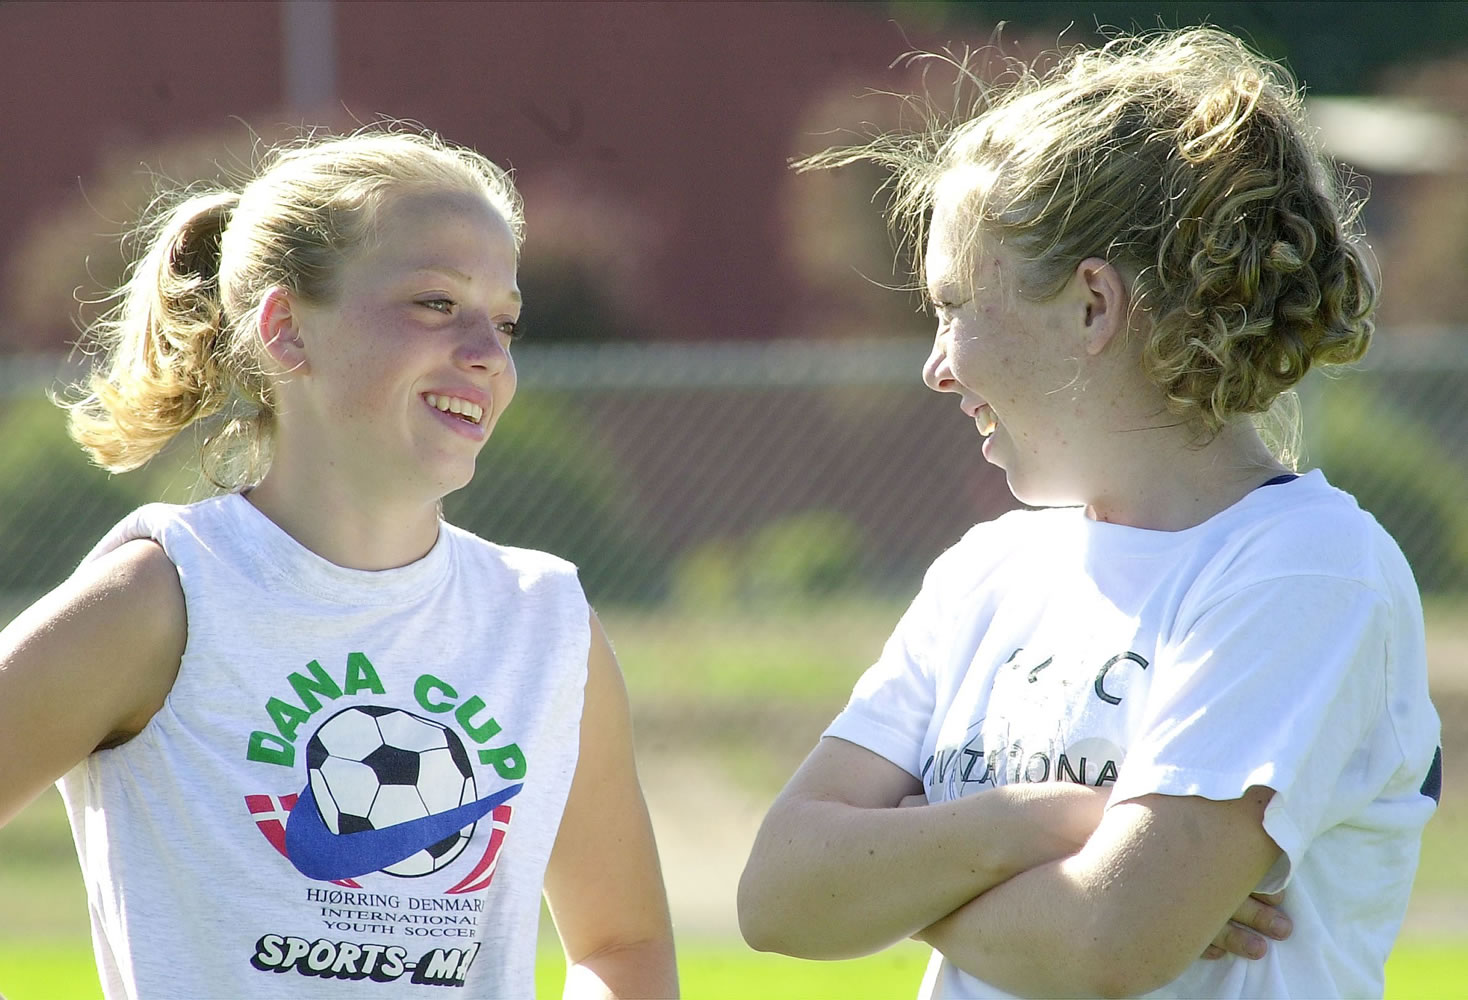 On Sept. 12, 2001, The Columbian ran a feature on Camas' soccer playing sisters Lisa (left) and Shannon Hogan. It was an uplifting change of pace from the disheartening news of the Sept.